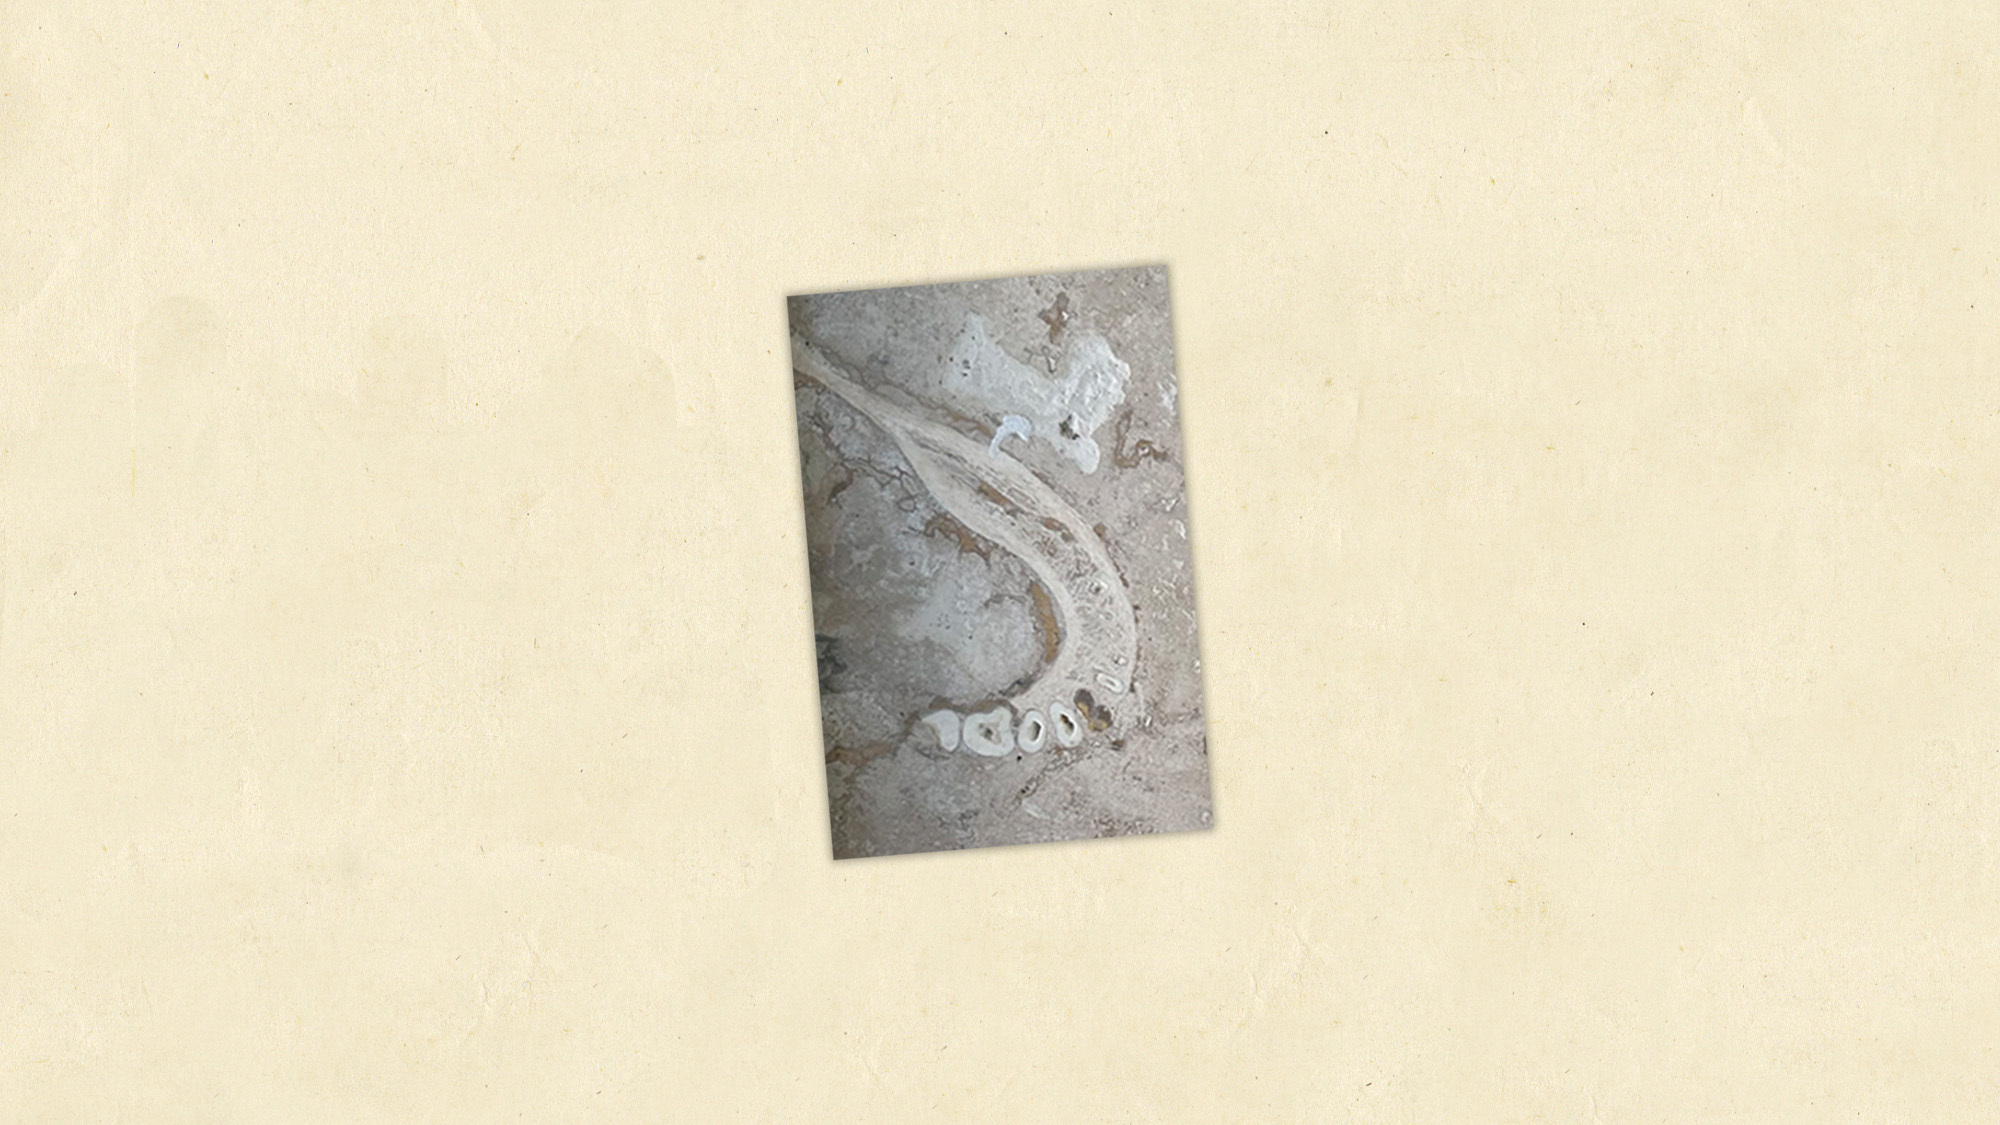 Photo of a fossilized jawbone in a sand-colored tile against a yellow background